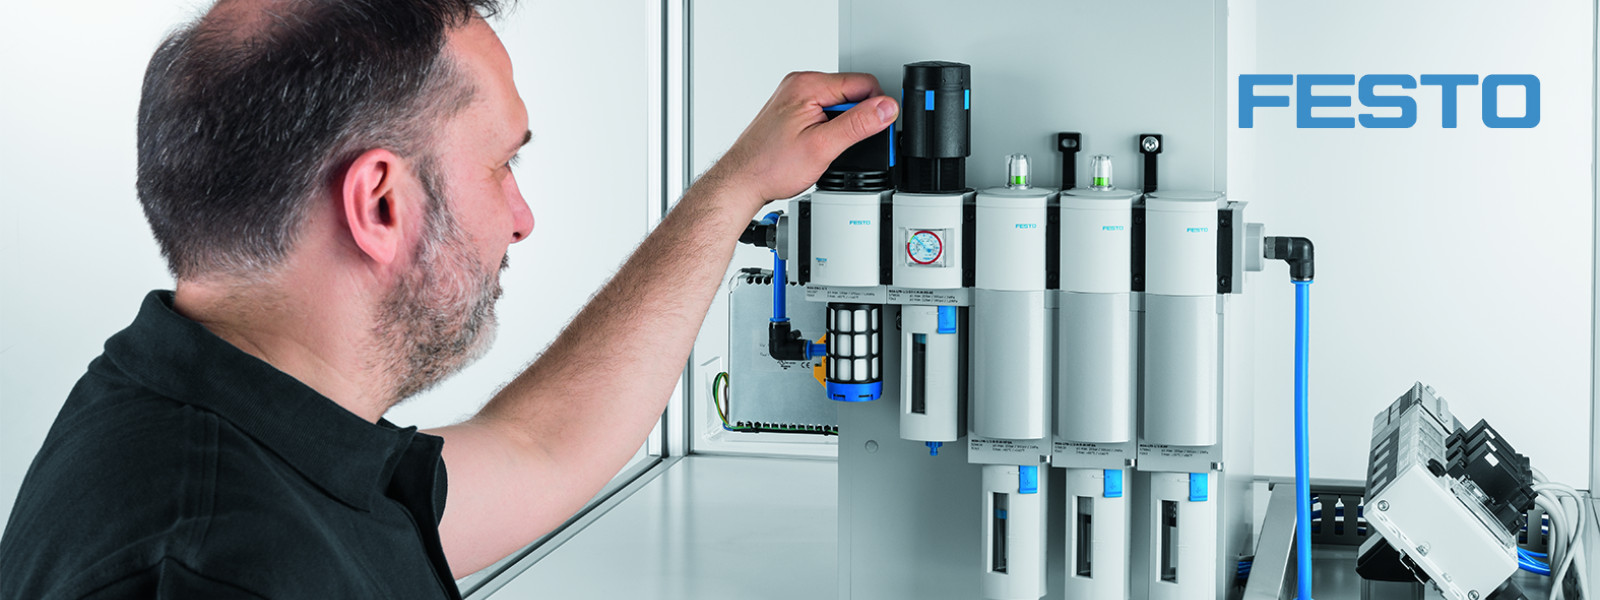 Procurement problems solved for process automation with the Festo Core Range